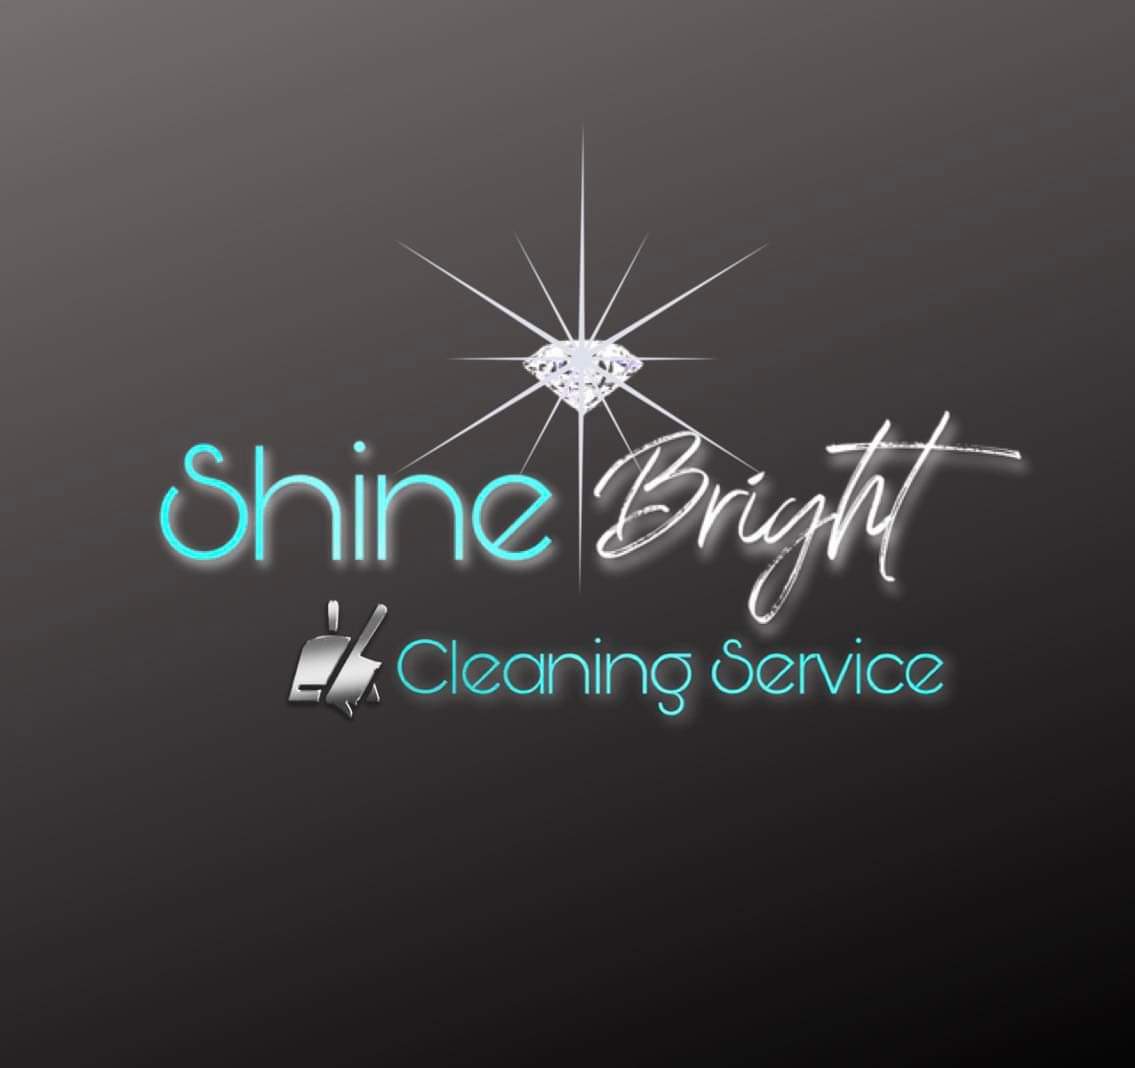 Shine Bright Residential and Commercial Cleaning Service Logo